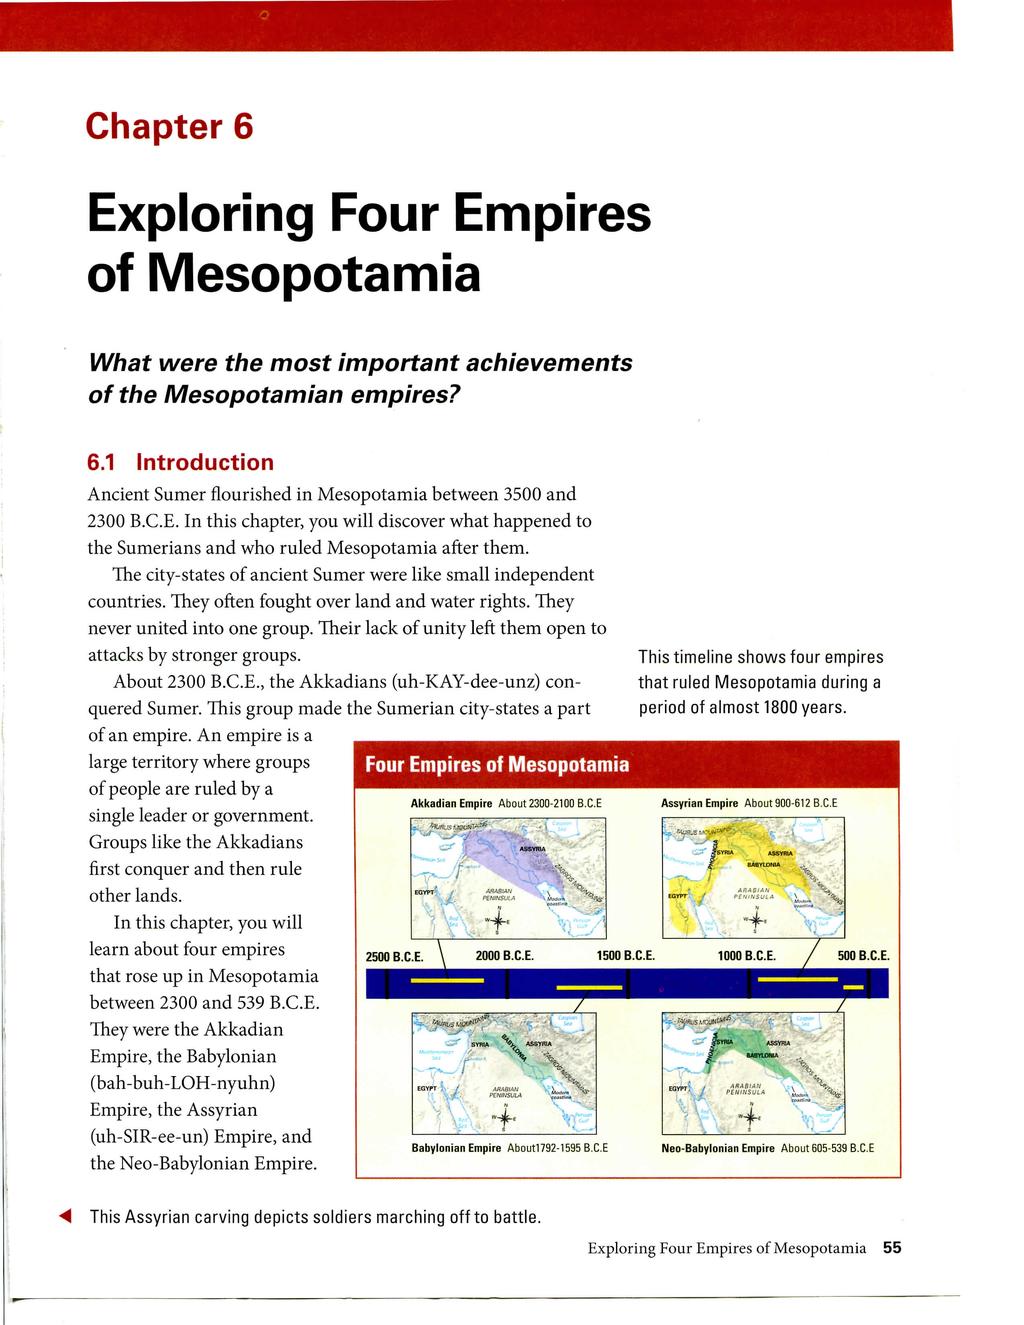 Chapter 6 Exploring Four Empires of Mesopotamia What were the most important of the IVlesopotamian empires? achievements 6.